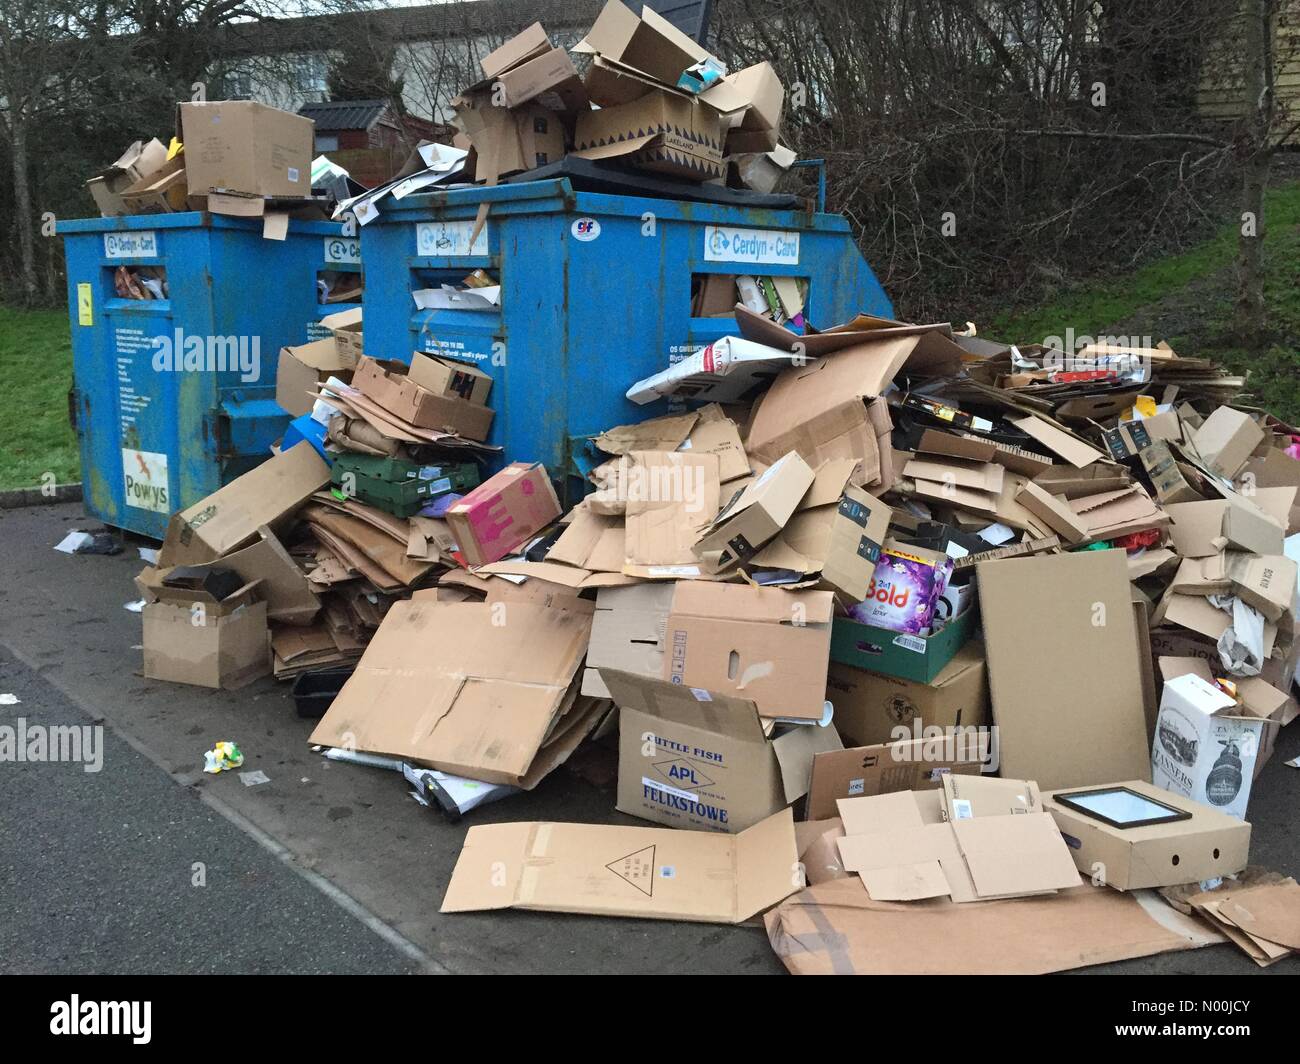 Builth Wells, Powys, UK. 23rd December, 2017. Cardboard packaging piles up at the recycling facility just before Christmas. Credit: Graham M. Lawrence/StockimoNews/Alamy Live News Stock Photo